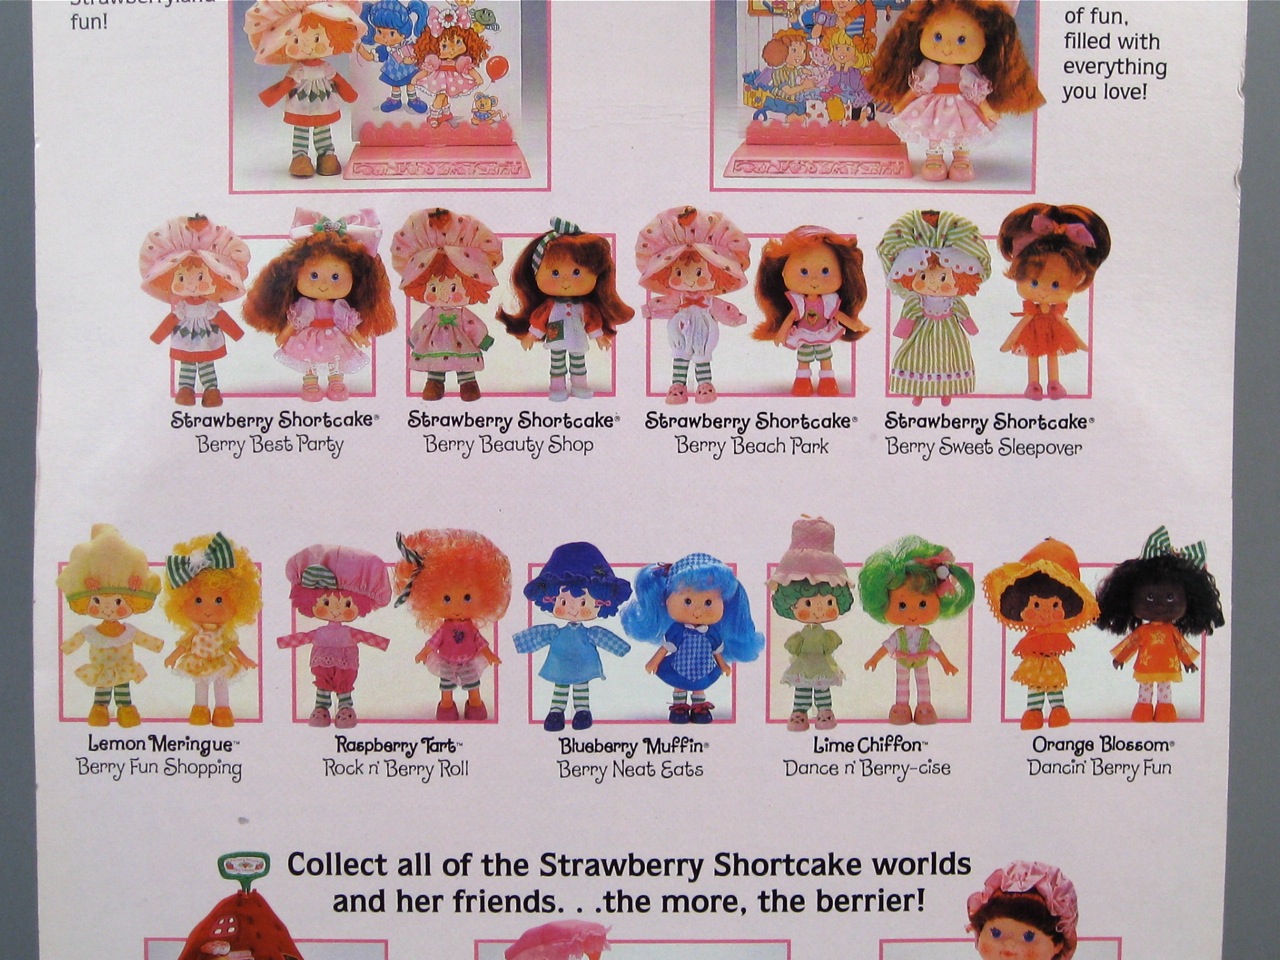 Strawberry Shortcake Blueberry Muffin Doll with Blue Hair and Strawberry Scented Hair - wide 4